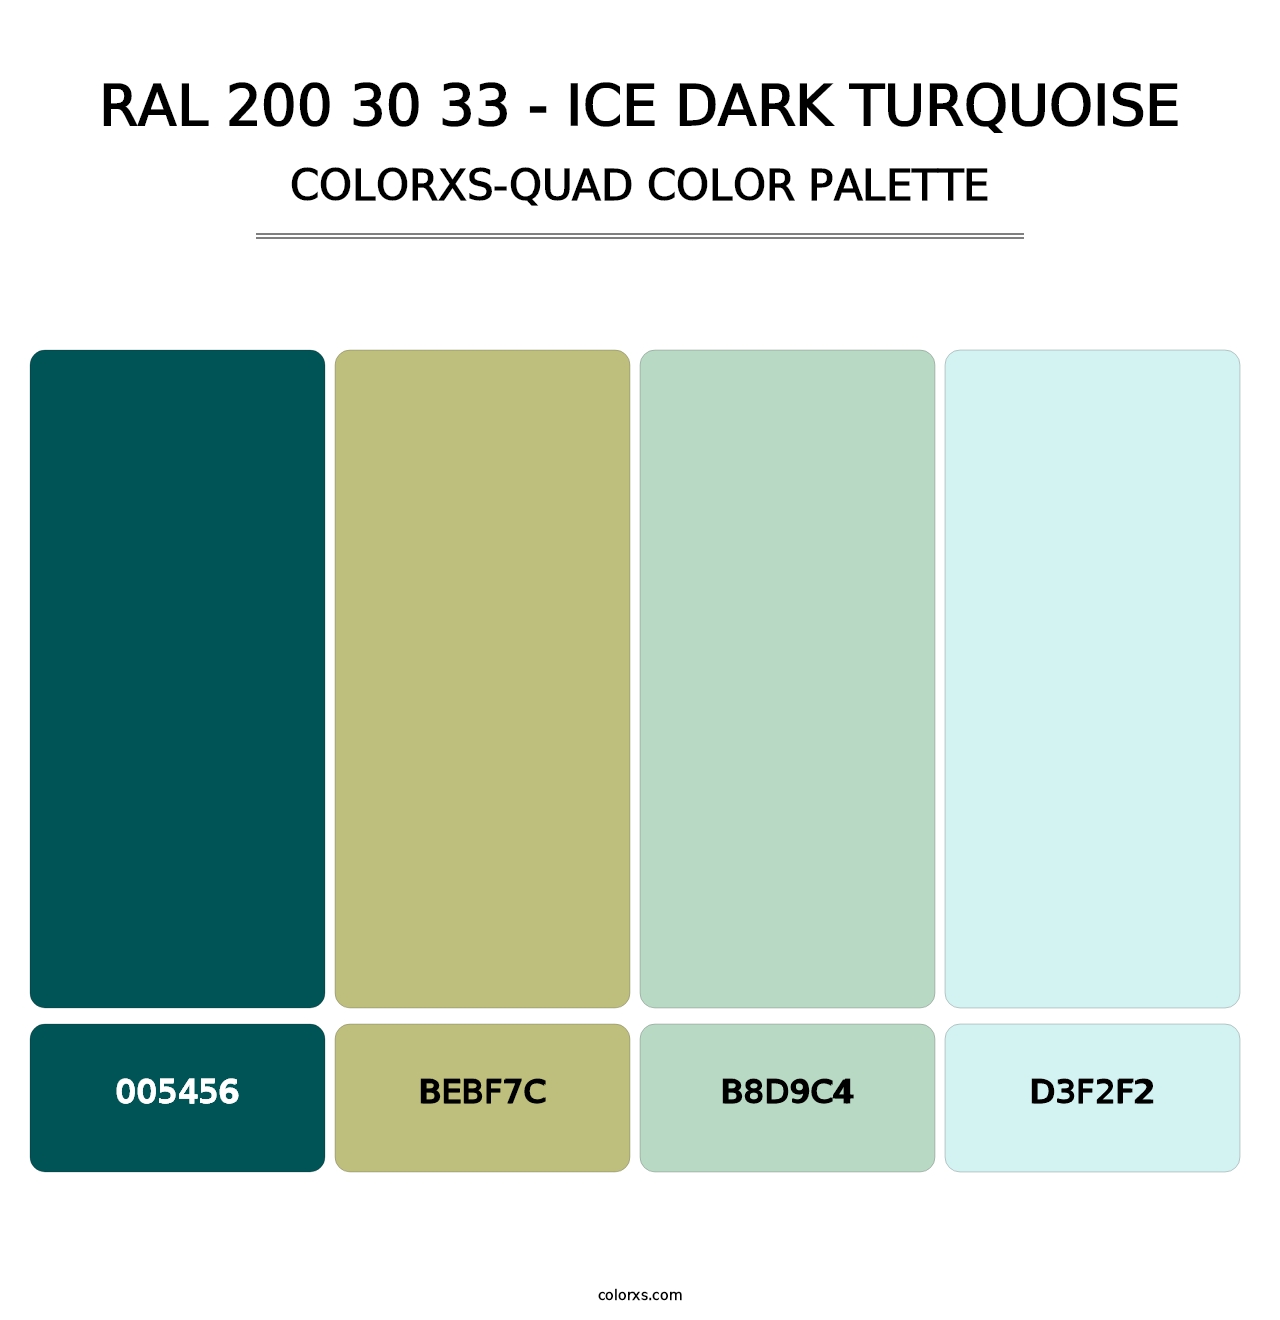 RAL 200 30 33 - Ice Dark Turquoise - Colorxs Quad Palette